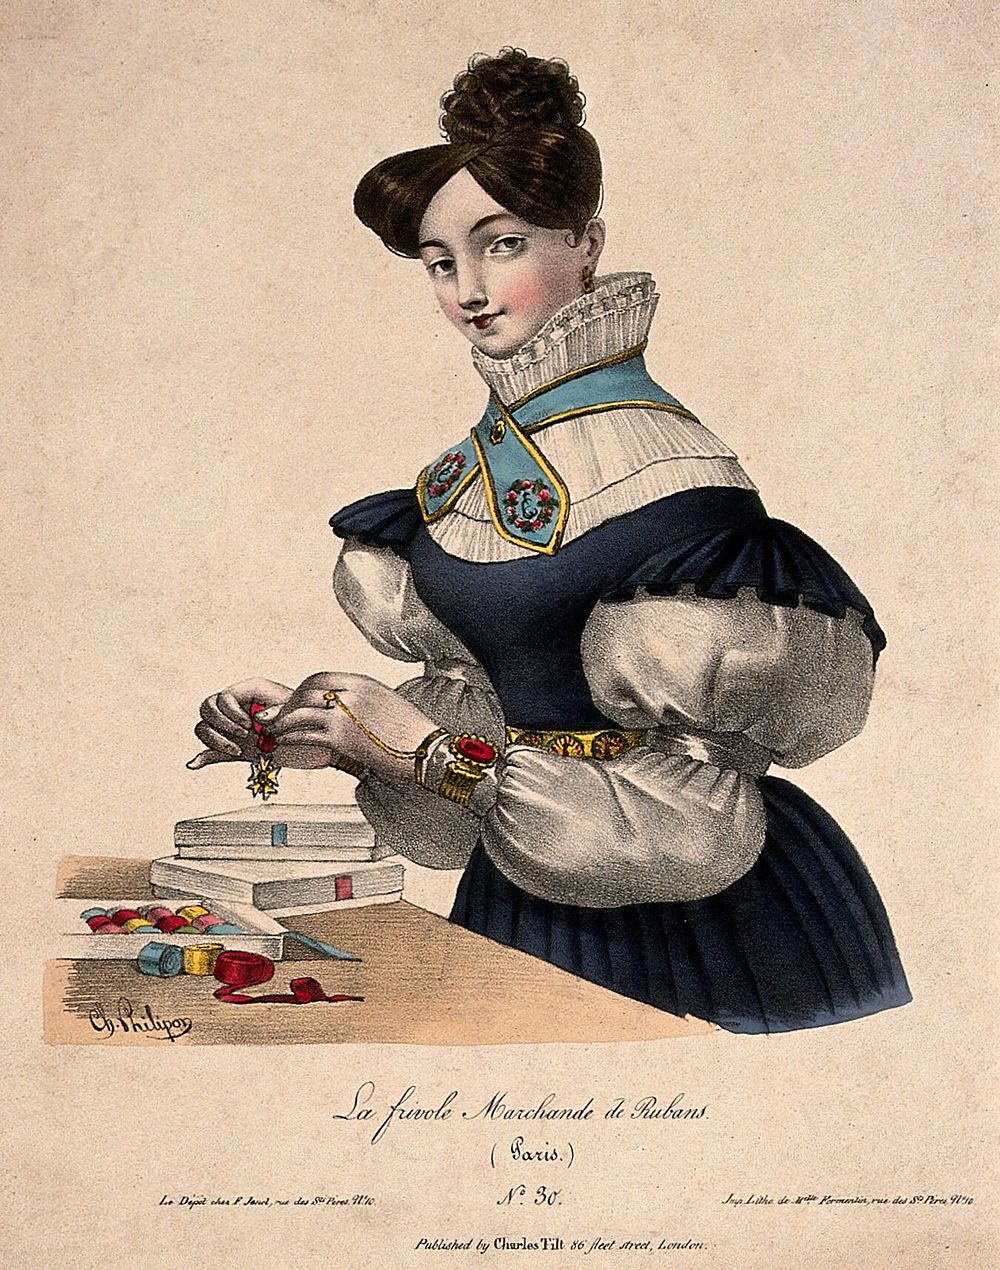 A woman tying ribbon onto a medal. Coloured lithograph by Joséphine-Clémence Formentin after Charles Philipon.